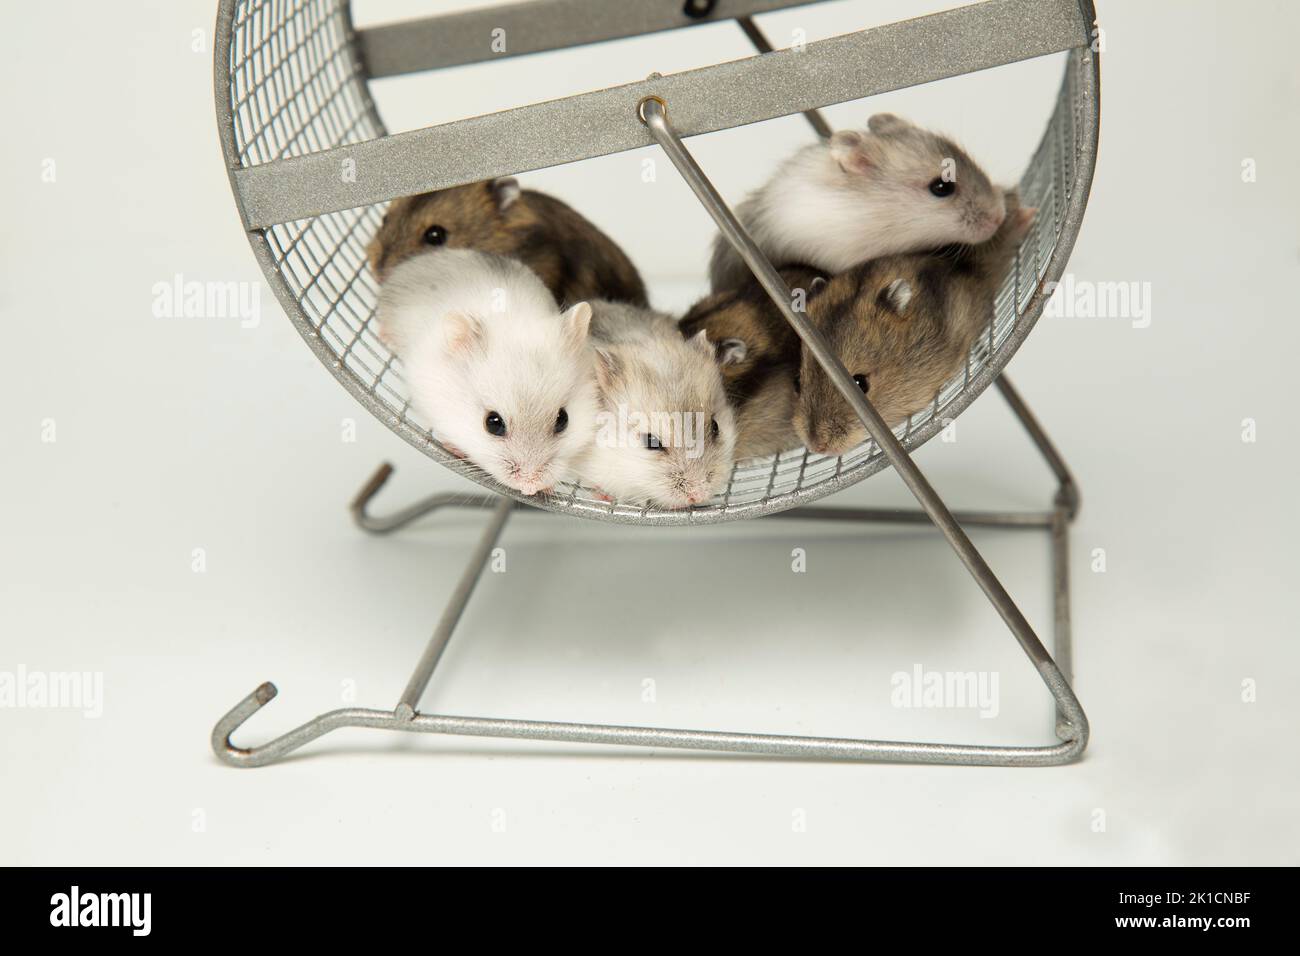 Dzungarian hamsters on a wheel. Cute fluffy pets. A brood of young hamsters. Stock Photo